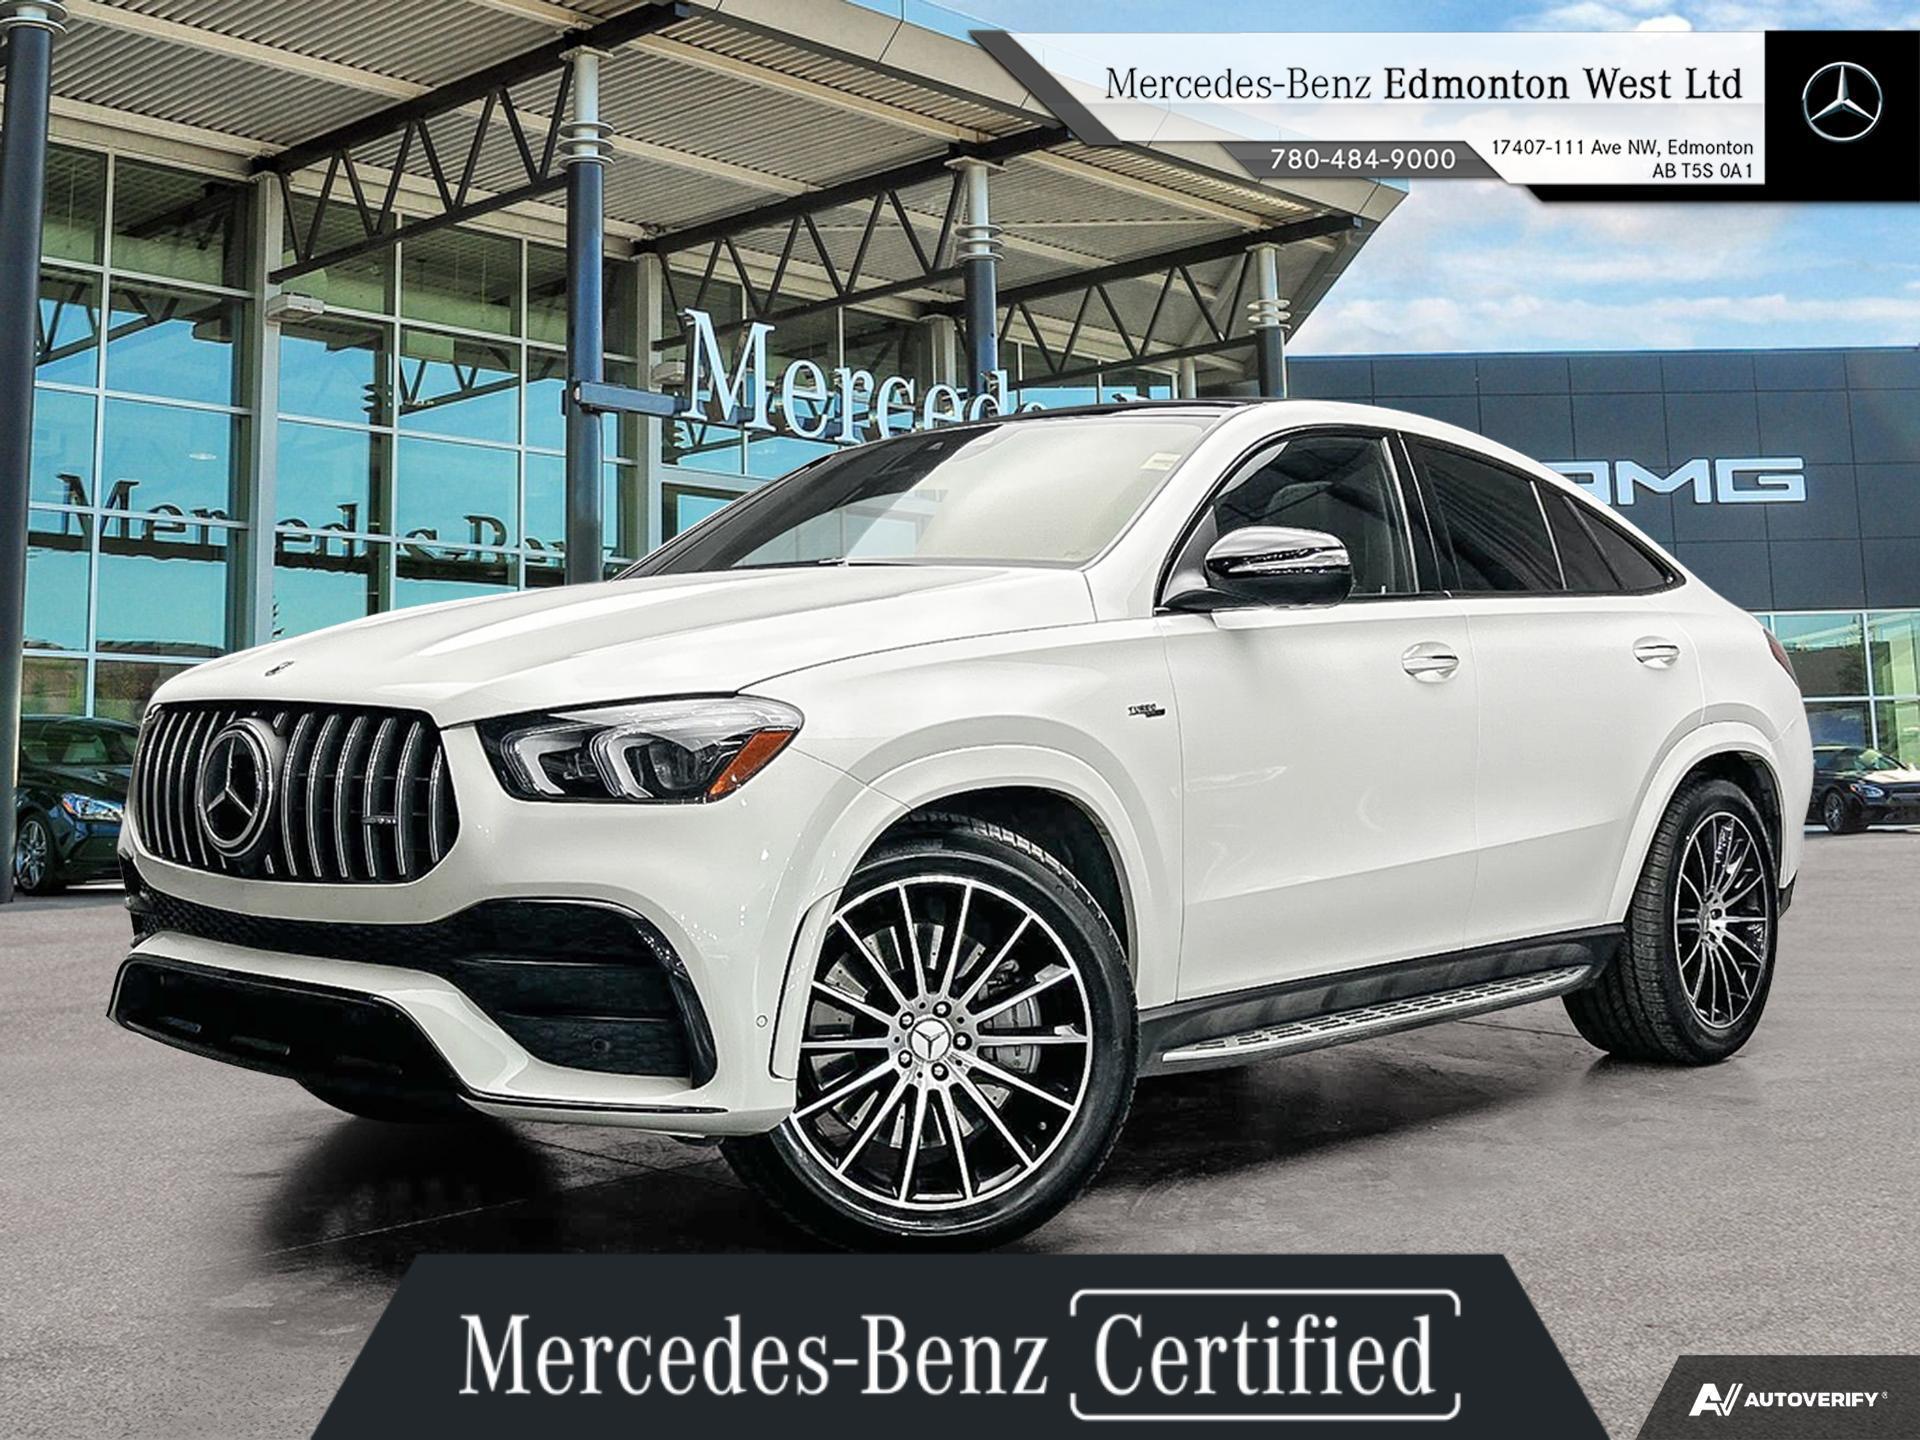 2021 Mercedes-Benz GLE AMG 53 4MATIC+ Coupe  - Low Kilometers -  Exclusiv